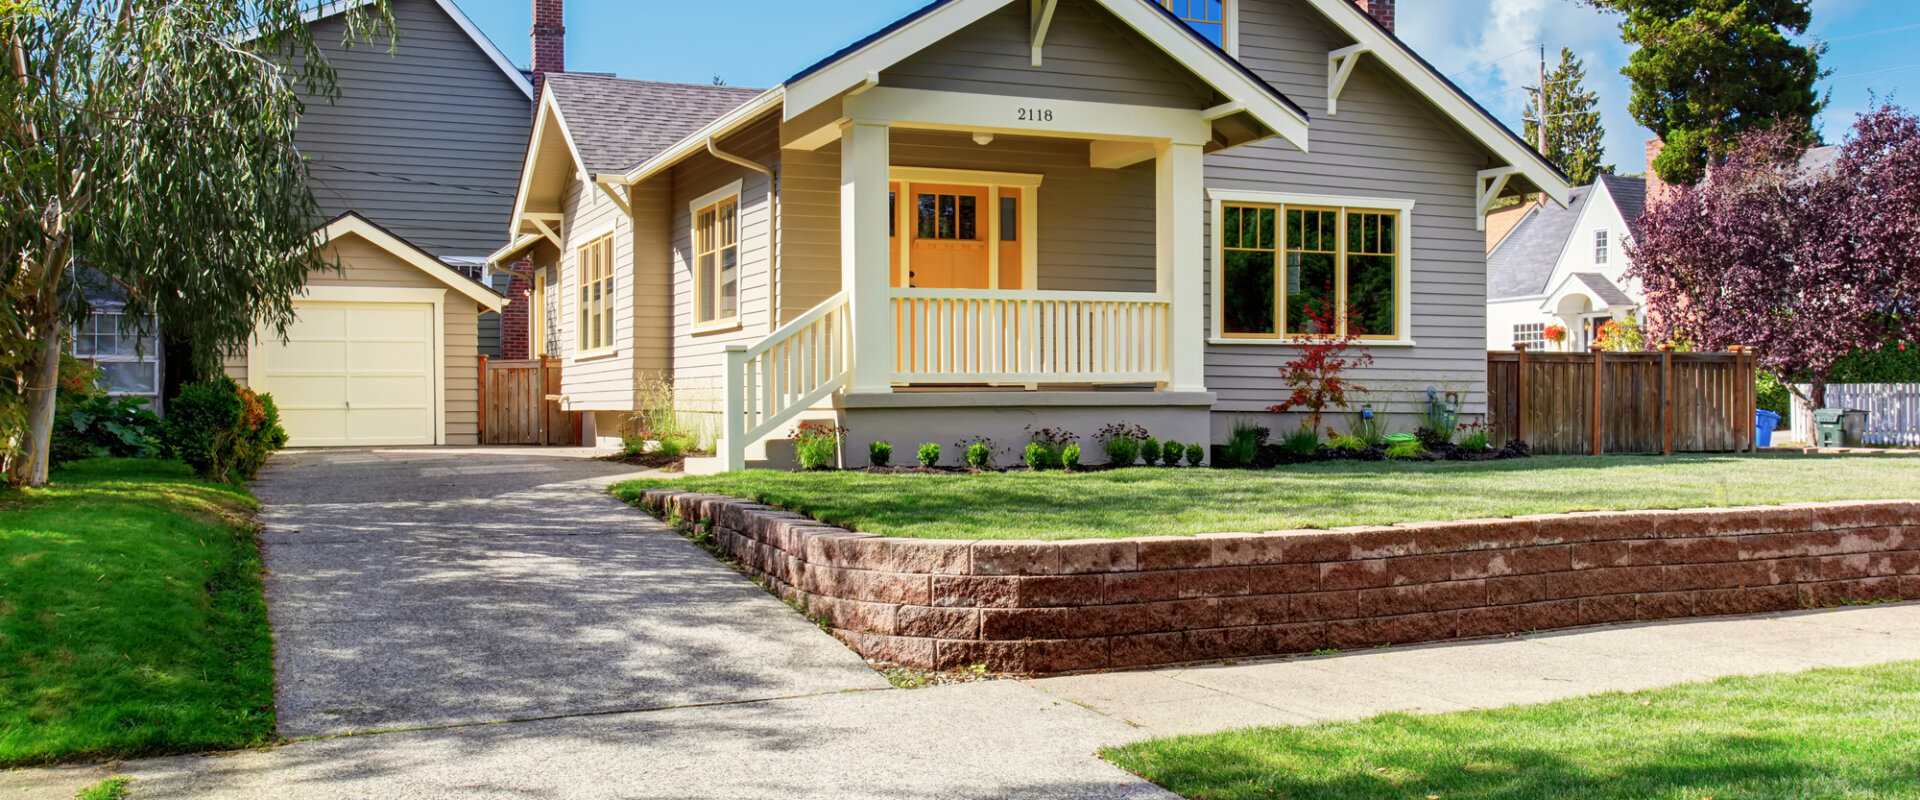 Sell Your House Fast In Sacramento, CA